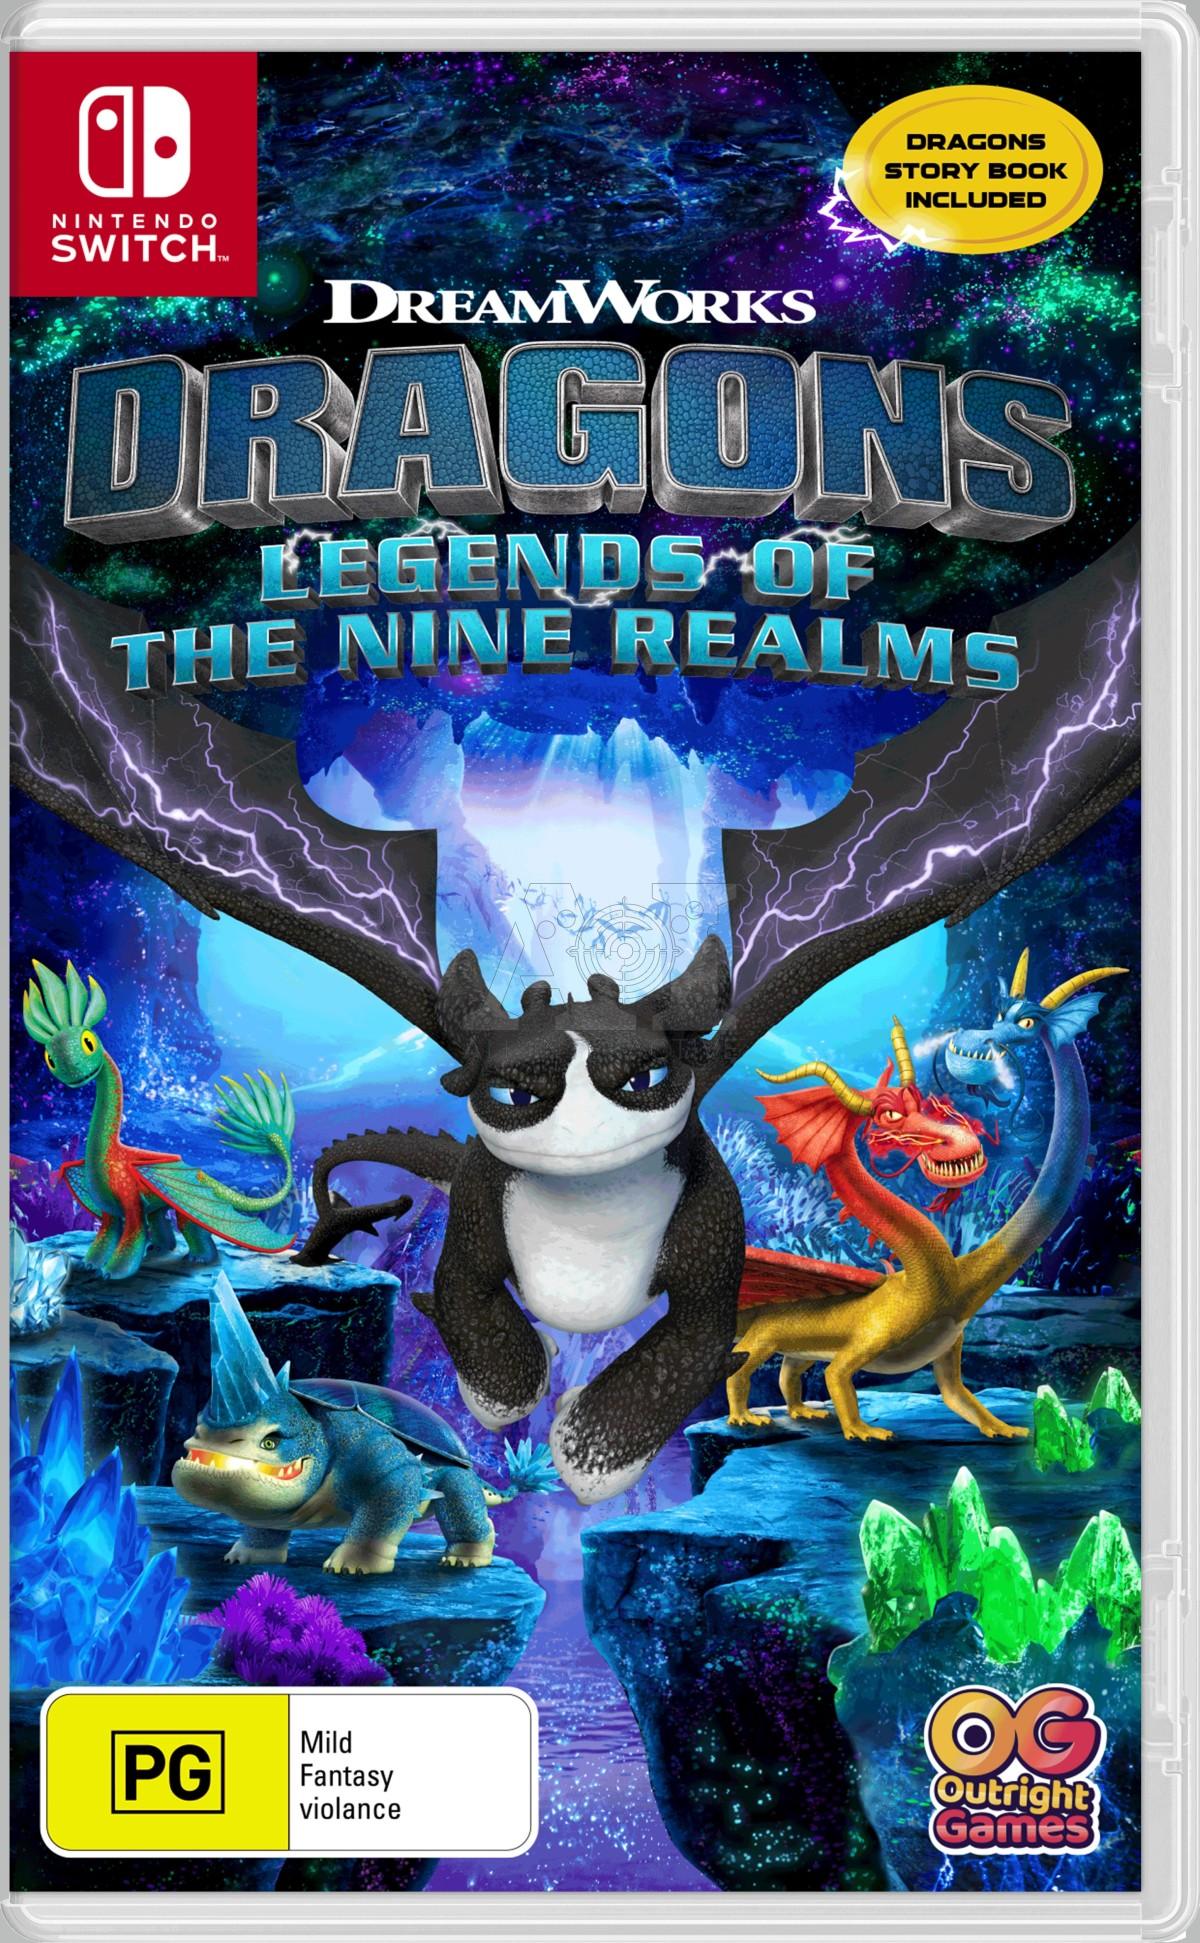 NINTENDO SWITCH DRAGONS LEGENDS OF THE NINE REALMS